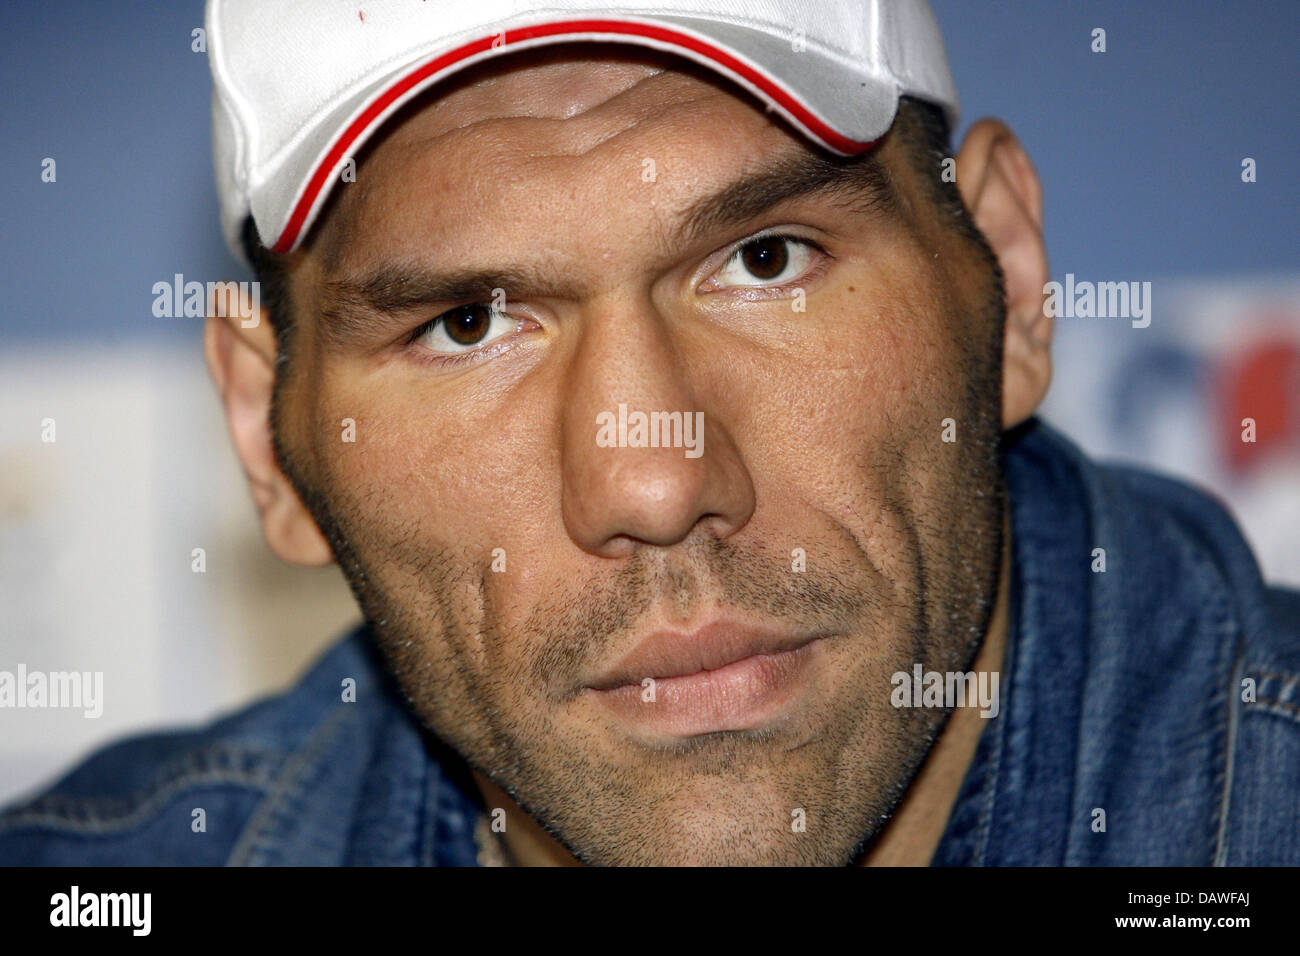 World Boxing Association (WBA) heavyweight champion Russian Nikolai Valuev is pictured during a press conference at the Porsche Arena in Stuttgart, Germany, Thursday, 12 April 2007. Valuev will defend his title against mandatory challenger Uzbek Chagaev coming Saturday, April 14th. Photo: Marijan Murat Stock Photo